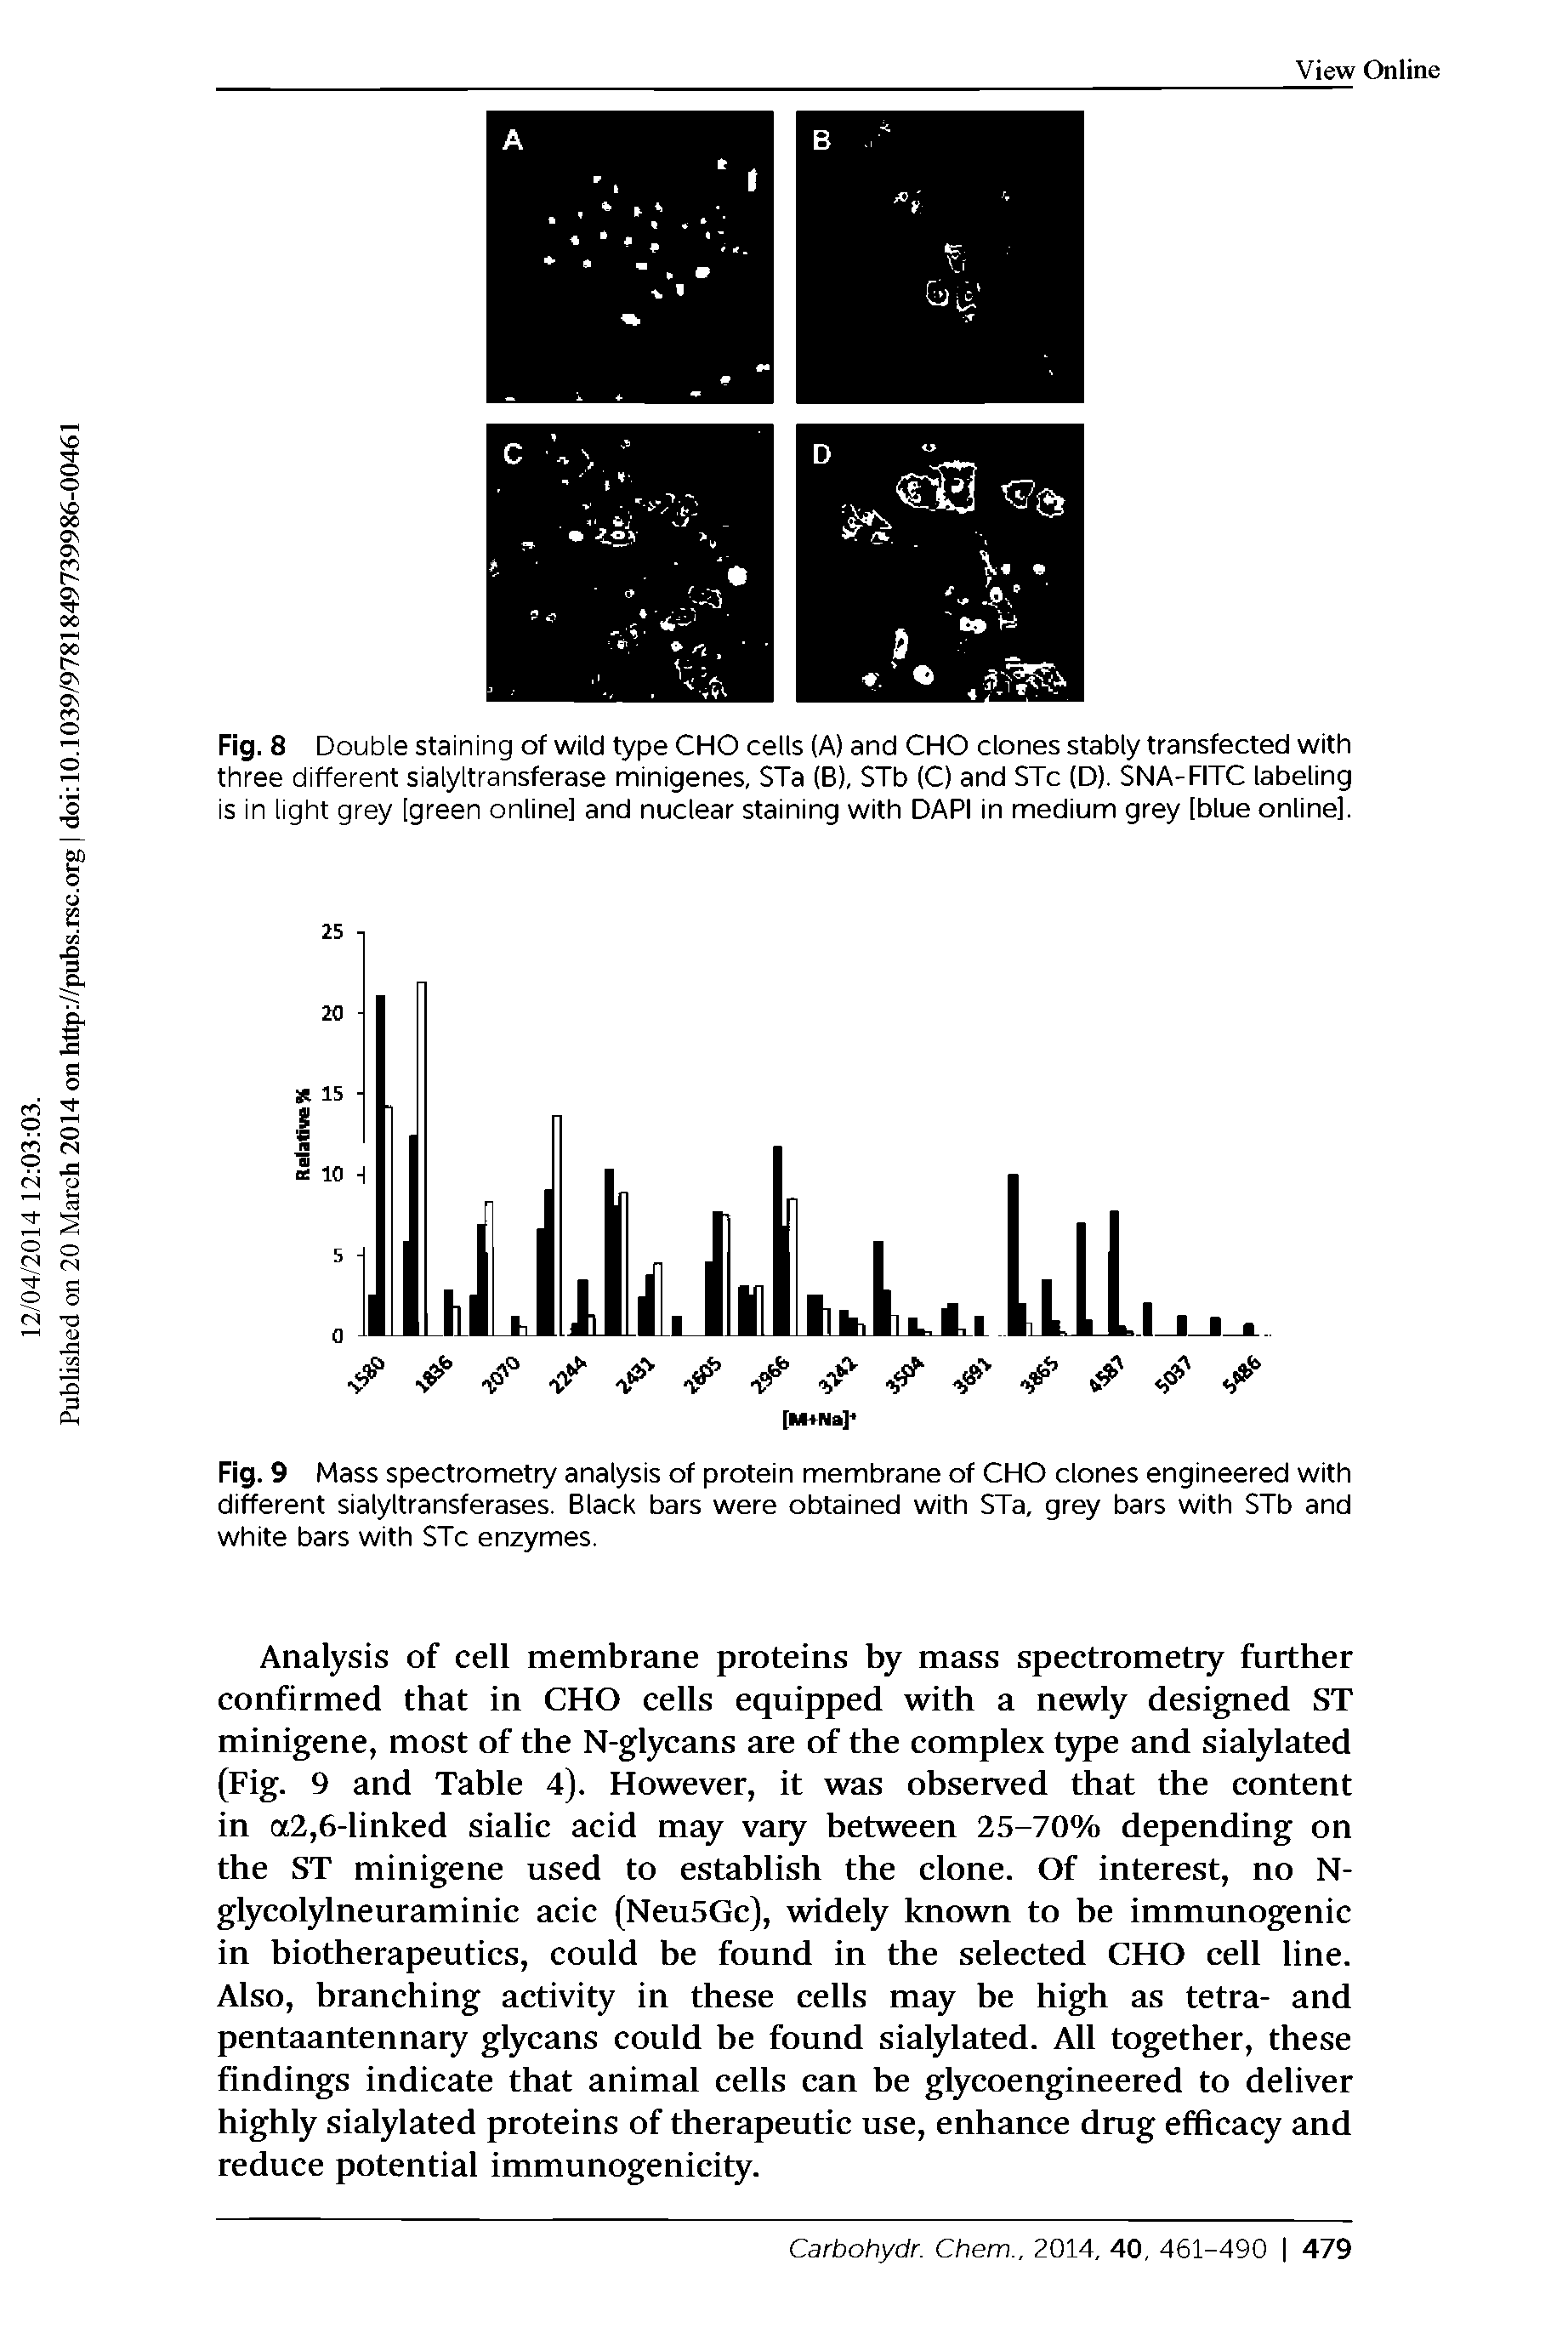 Fig. 9 Mass spectrometry analysis of protein membrane of CHO clones engineered with different sialyltransferases. Black bars were obtained with STa, grey bars with STb and white bars with STc enzymes.